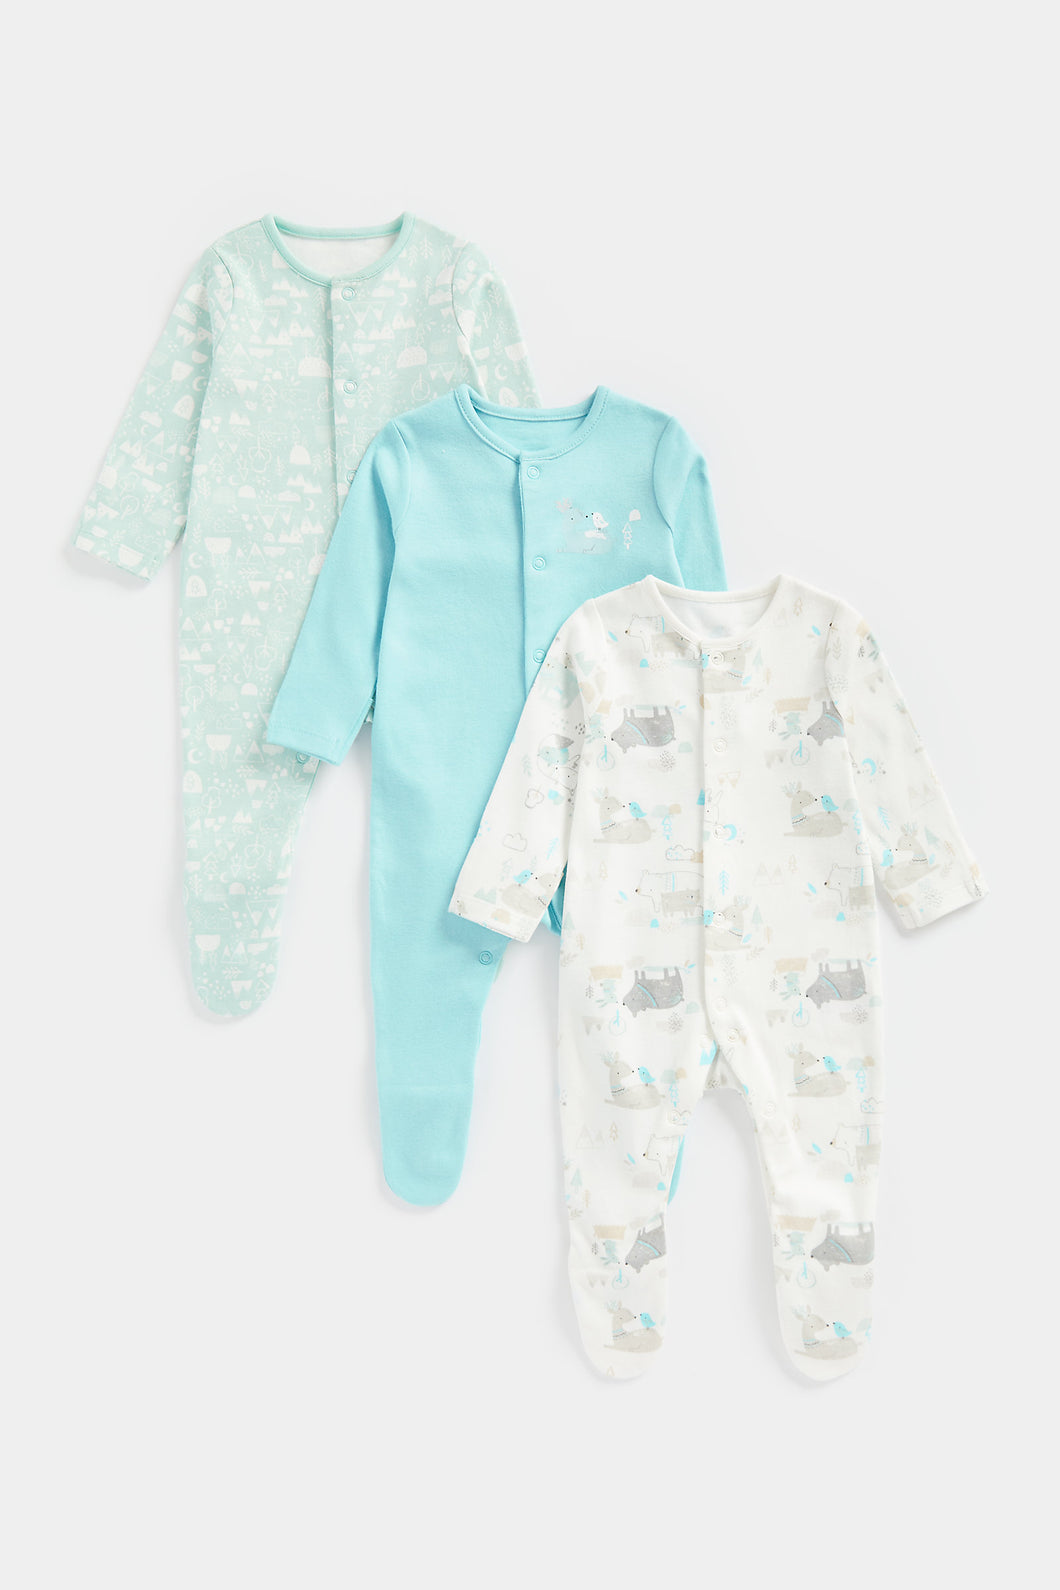 Mothercare Winter Bear Sleepsuits - 3 Pack